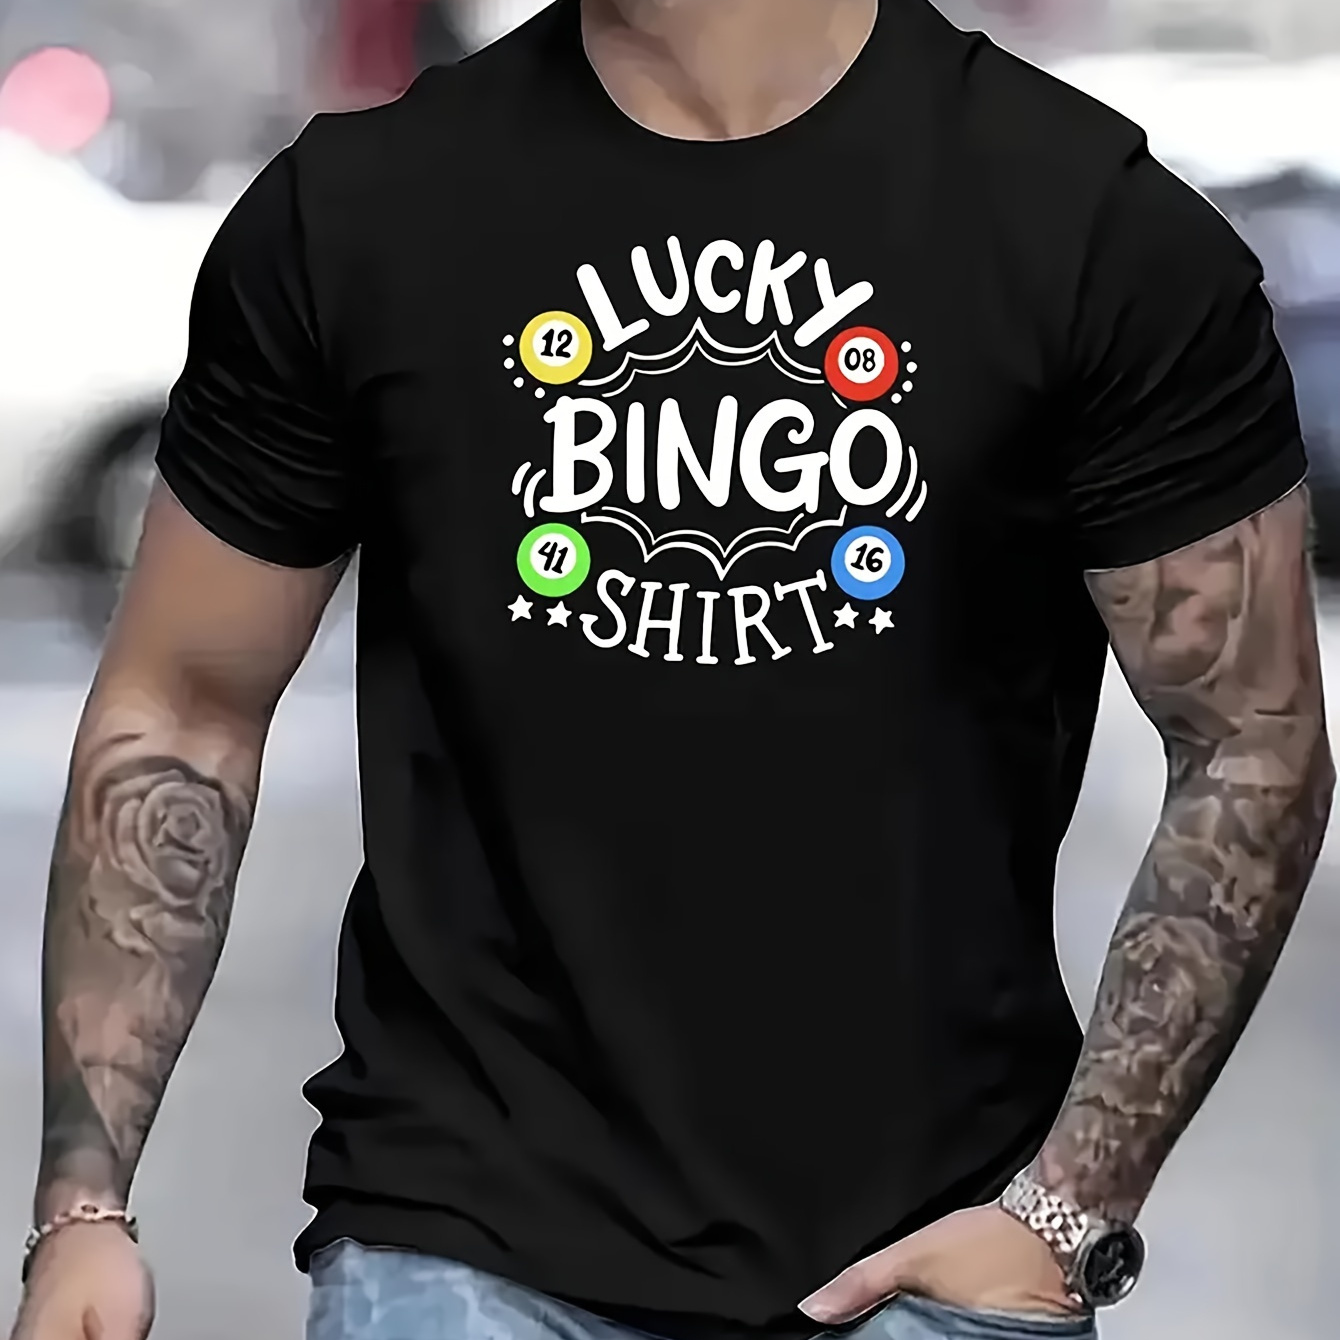 

bingo"-summer Men's T-shirt Short Sleeve Colorful Printed Pattern, Comfortable And Breathable Sports Top